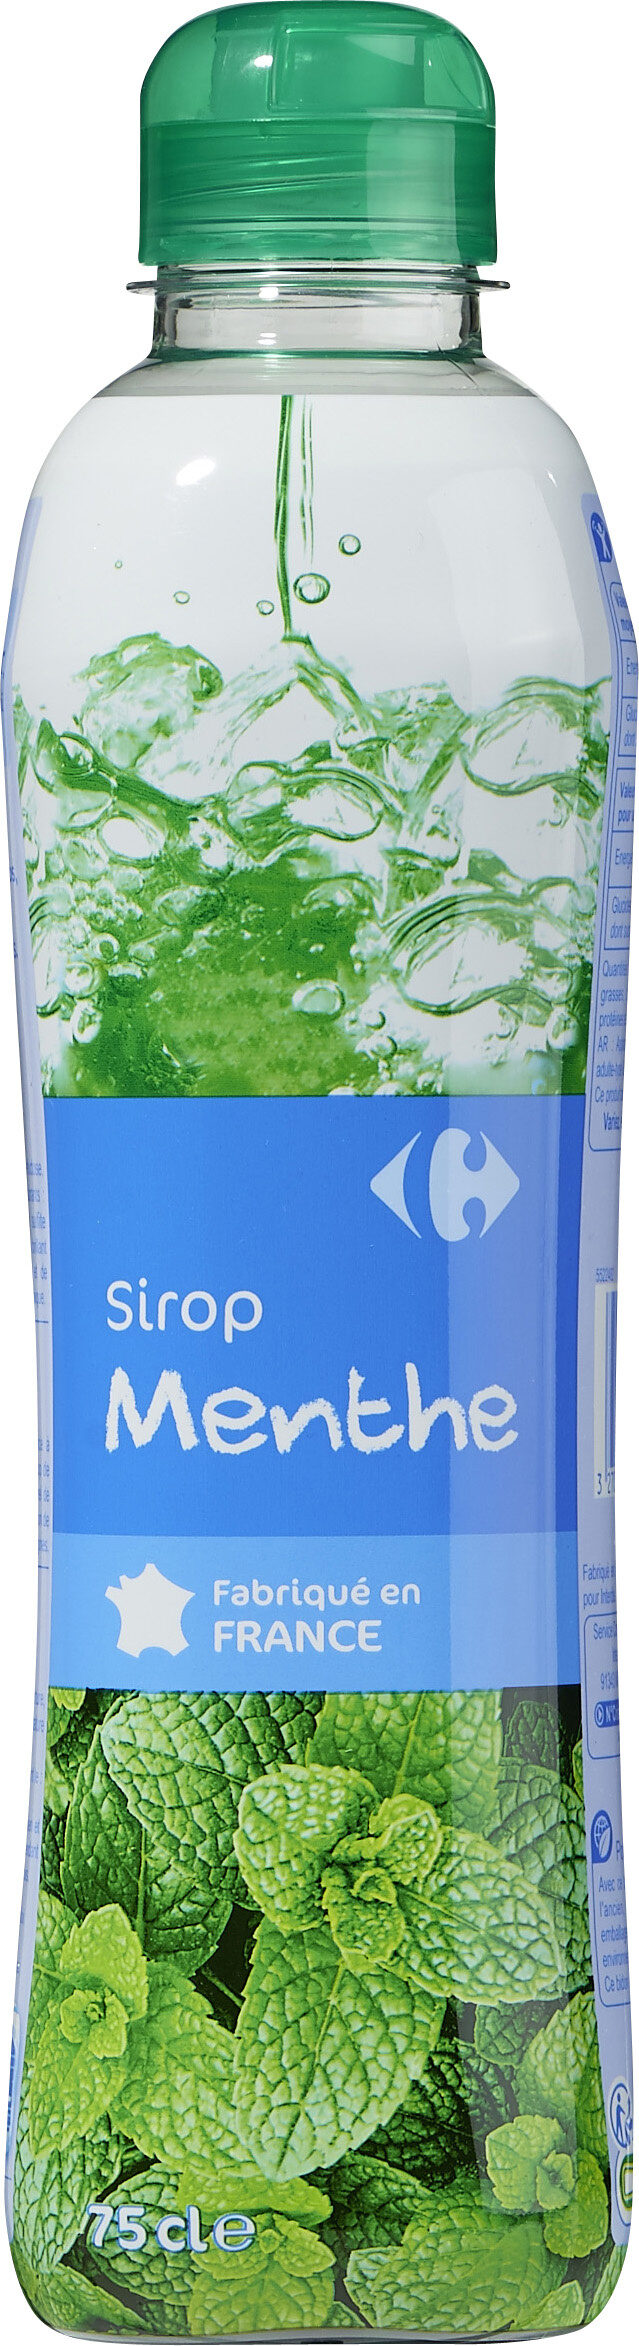 Sirop menthe - Product - fr